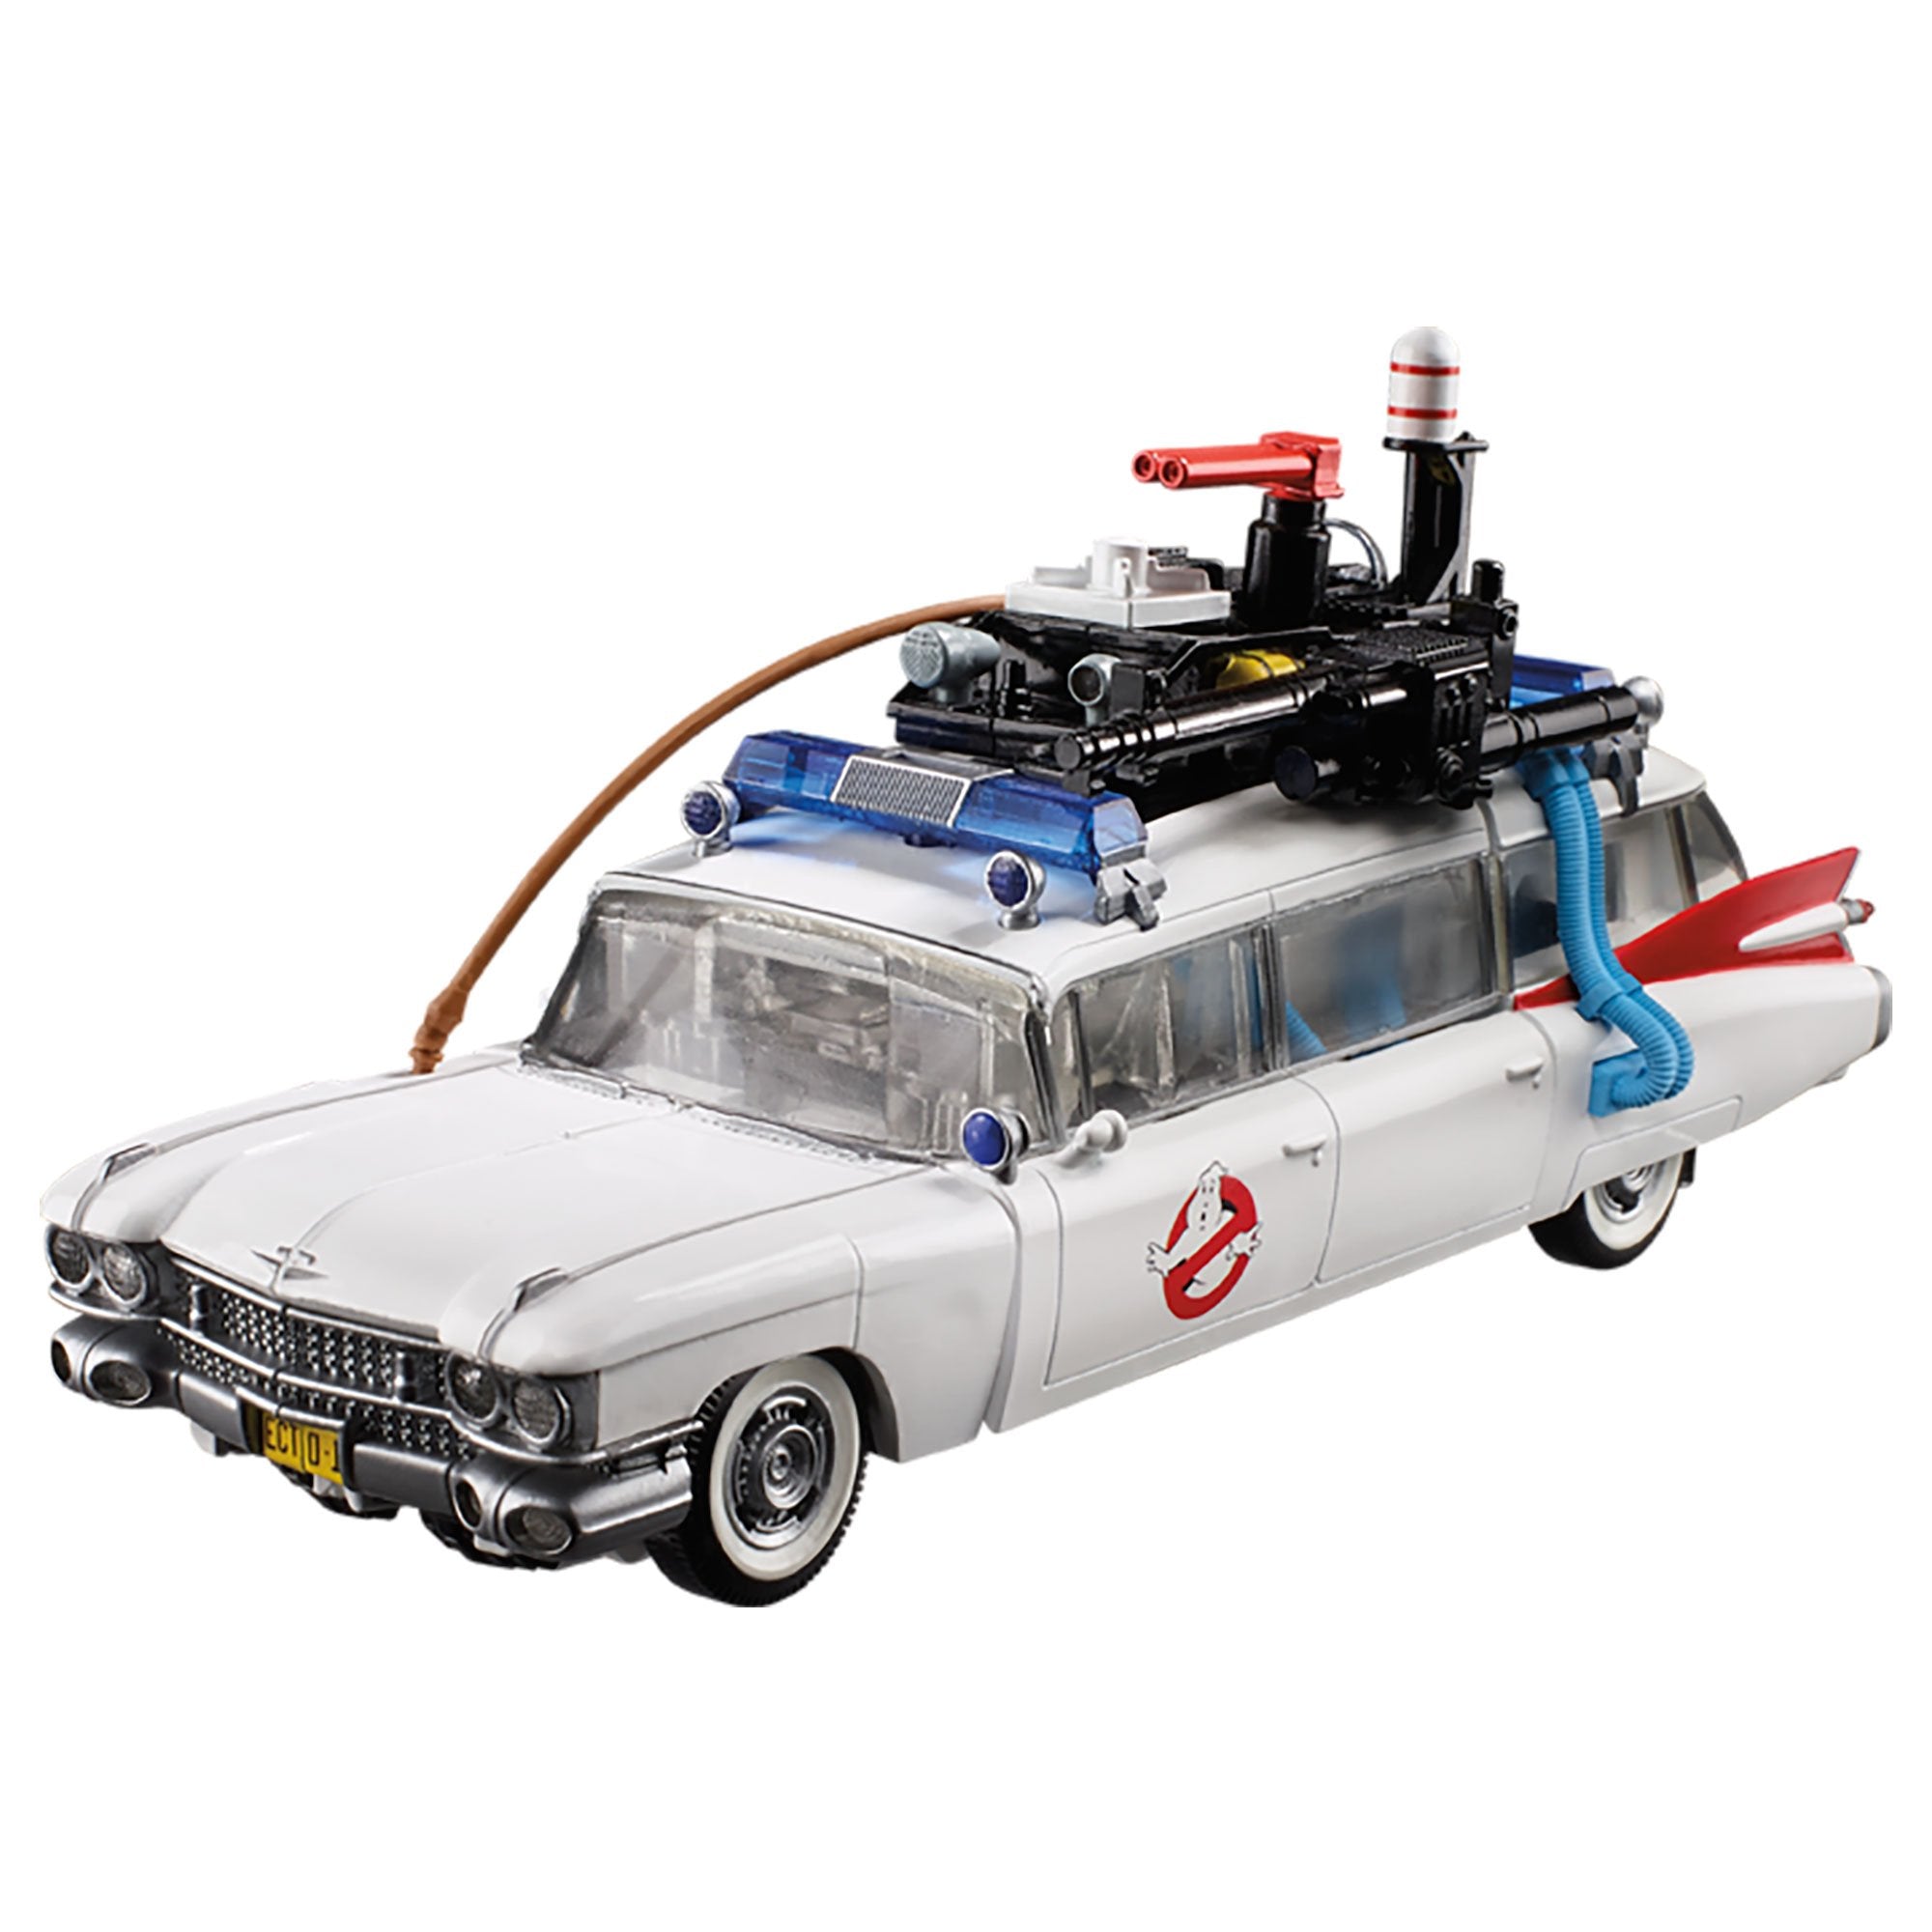 Transformers Generations Collaborative: Ghostbusters Mash-Up Ecto-1 Ectotron Action Figure